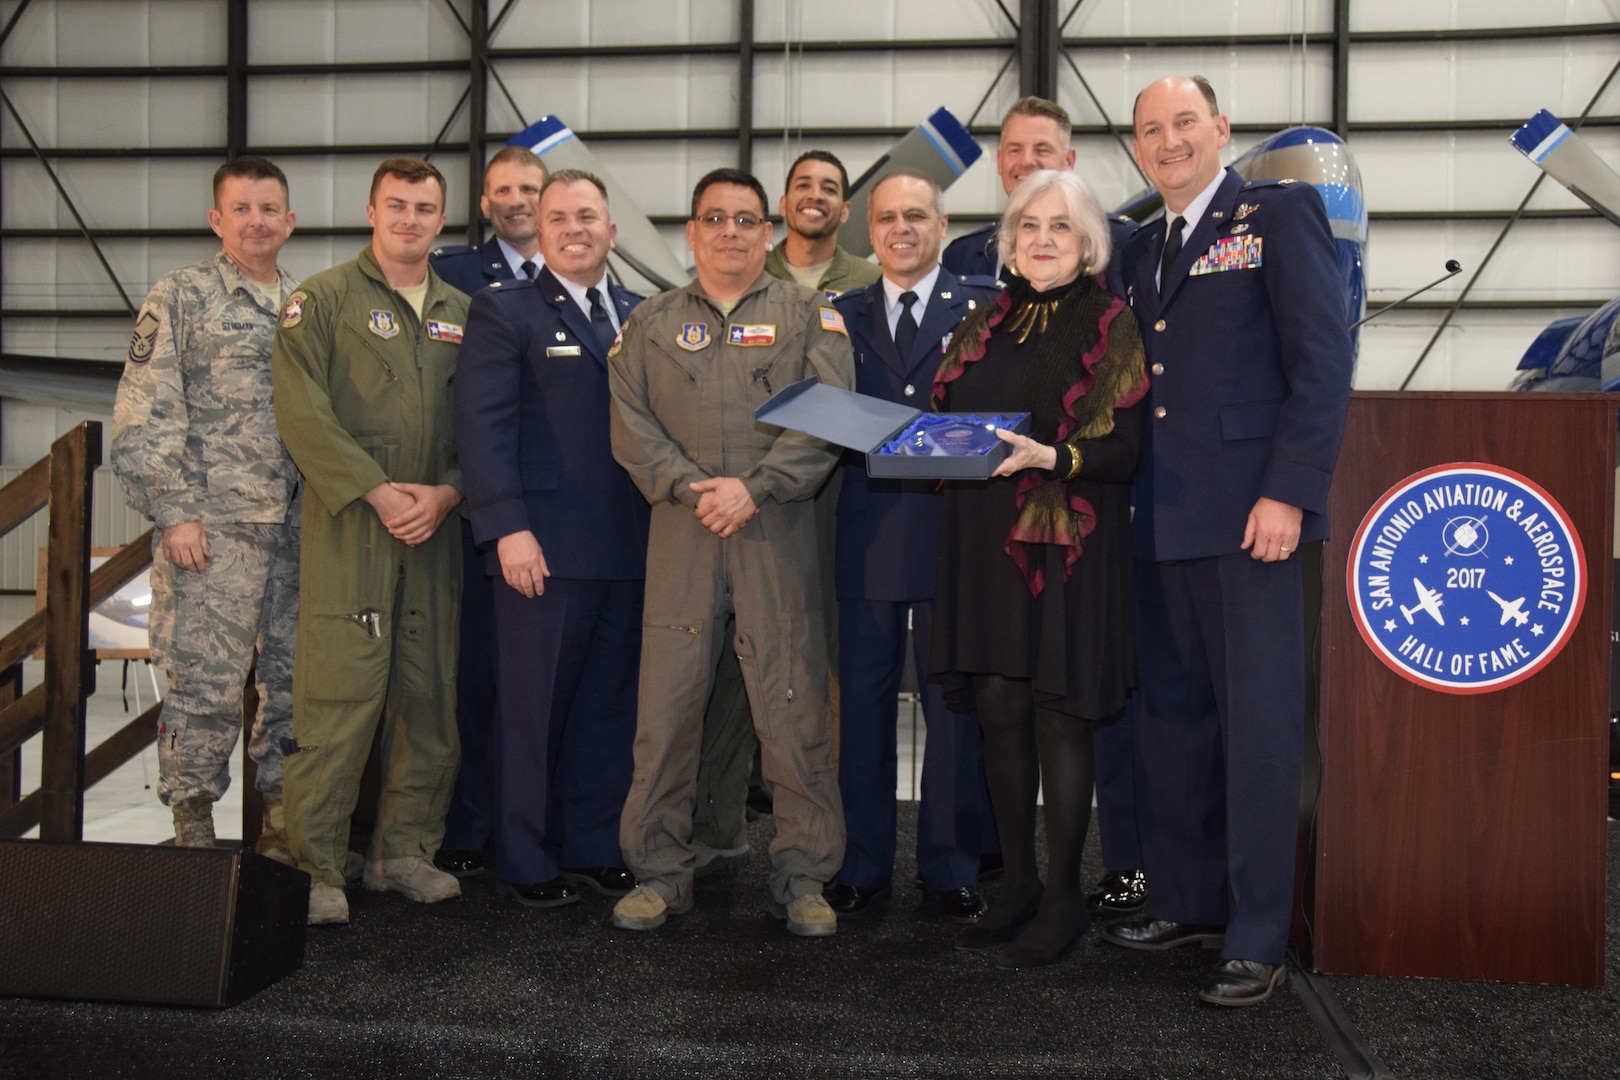 Members from the 433rd Airlift Wing, Joint Base San Antonio-Lackland, Texas join Col. Thomas K. "TK" Smith, Jr, 433rd AW commander, accepted induction into the San Antonio Aviation and Aerospace Hall of Fame, during an awards dinner, March 30, 2017 at the GDC Technics Hangar, Port San Antonio, (formerly Kelly Air Force Base), Texas. (U.S. Air Force photo by Minnie Jones)